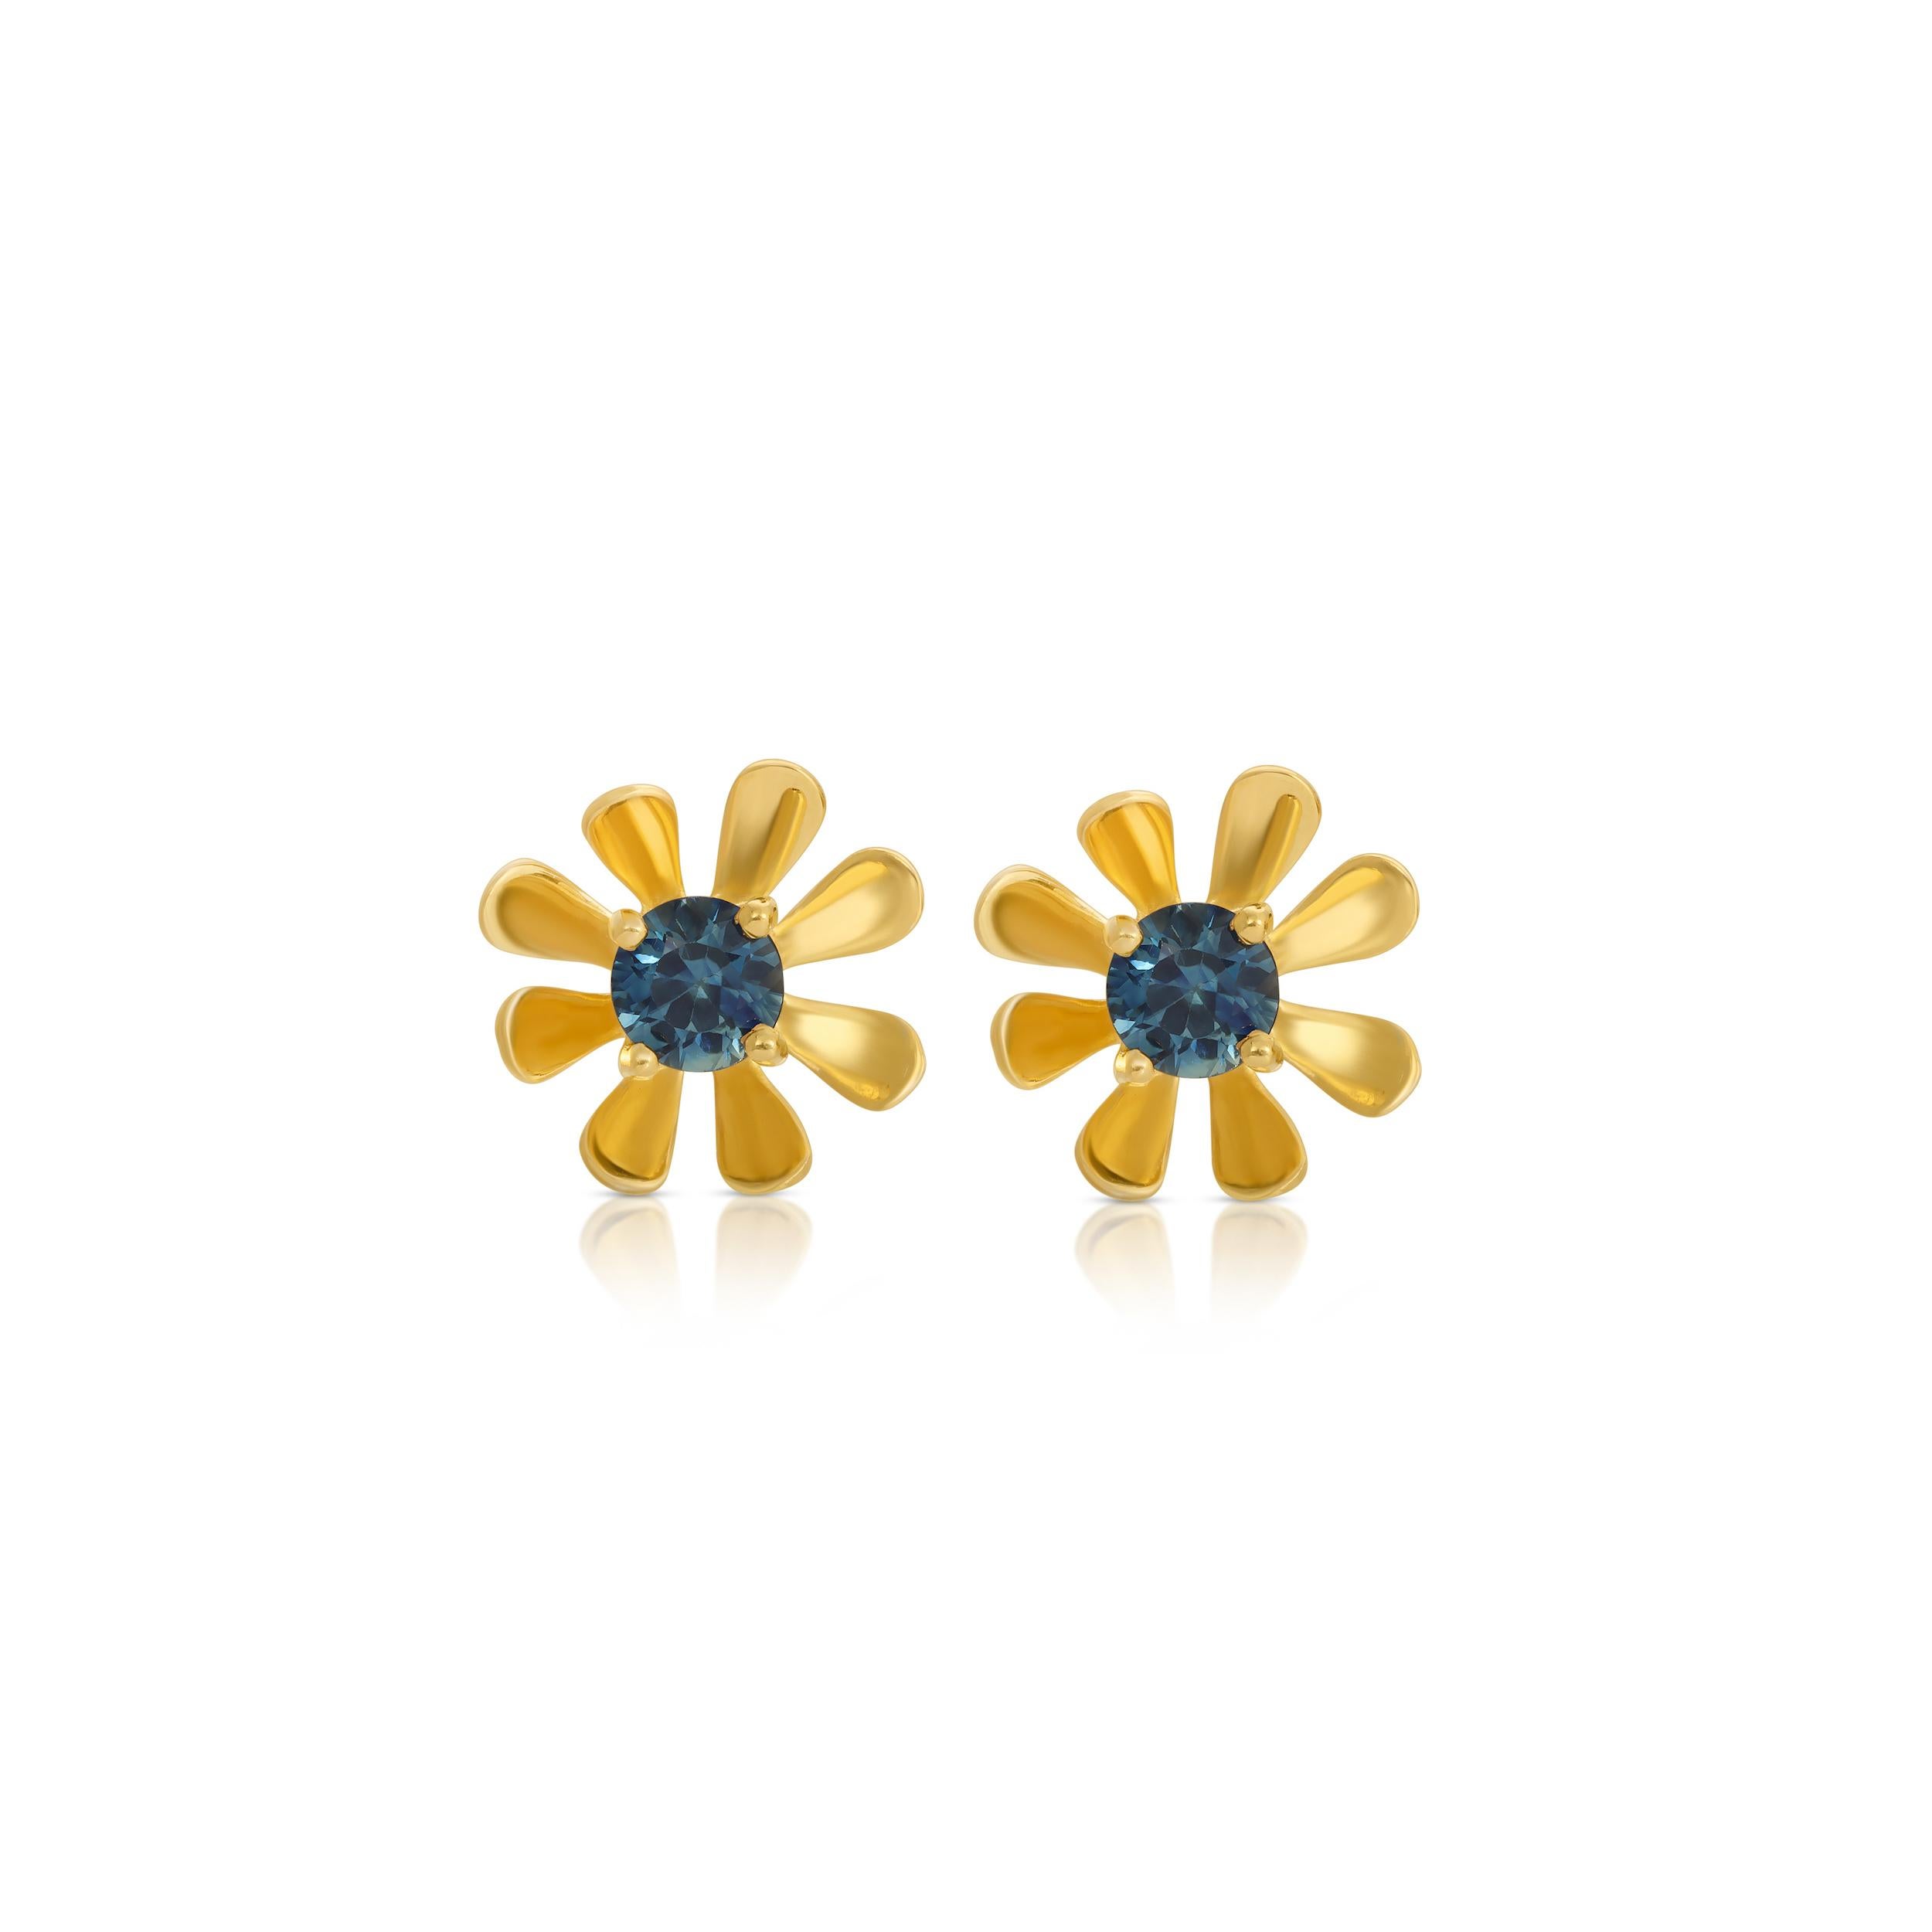 Unique and beautiful stud earrings in a modern floral design. This jewel features 1.90 Carats of Sapphires of the darkest blue-green hue prong set on stud earrings. These earrings are set in 22 Karat Gold overlay Silver and feature stem and